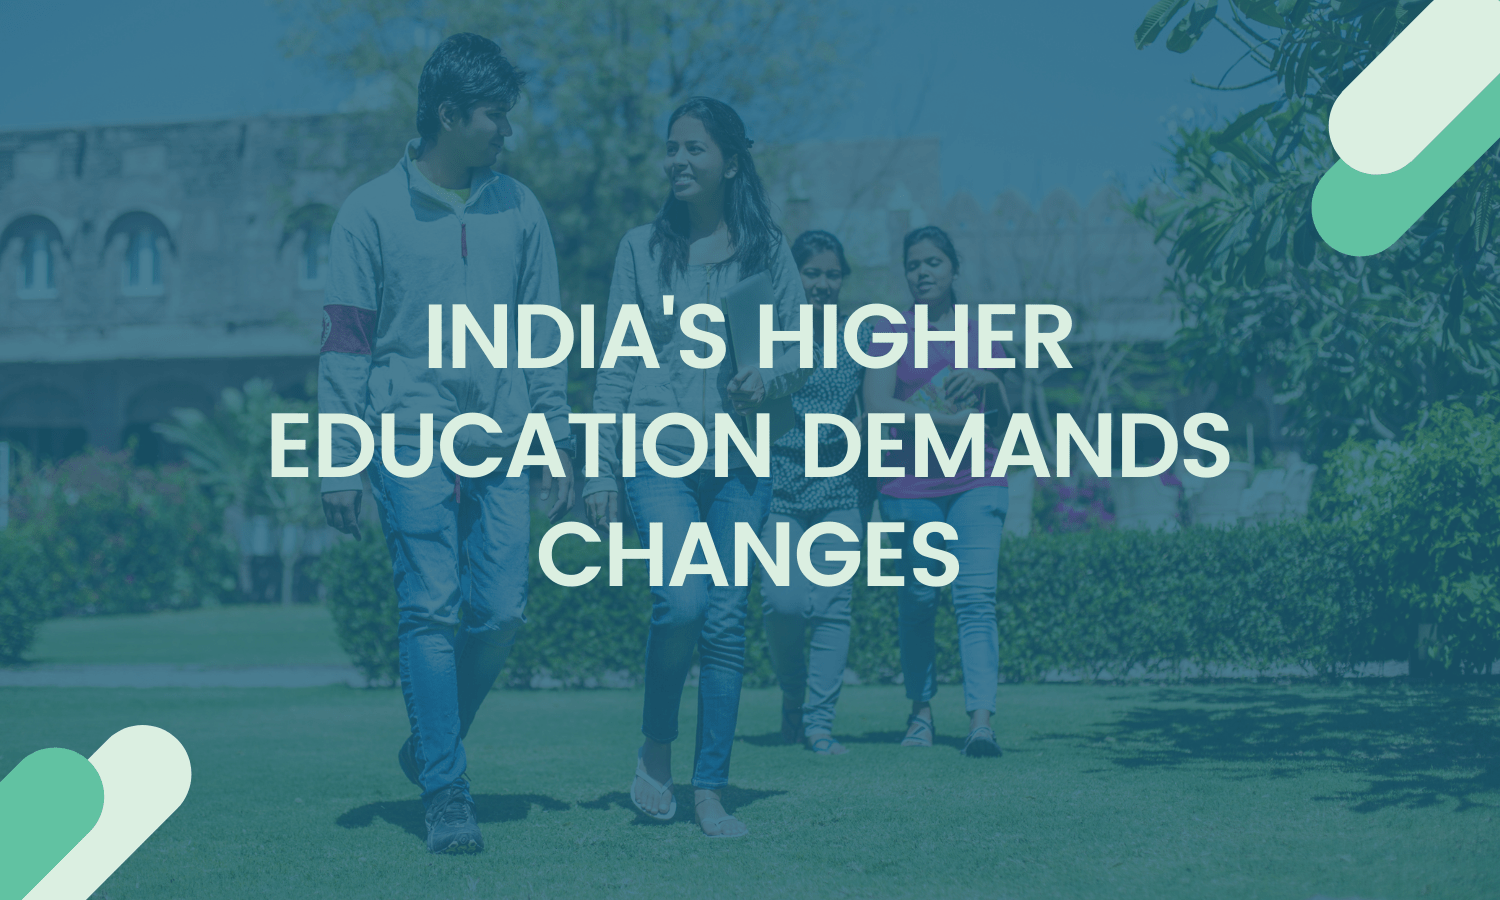 India's Higher education demands changes